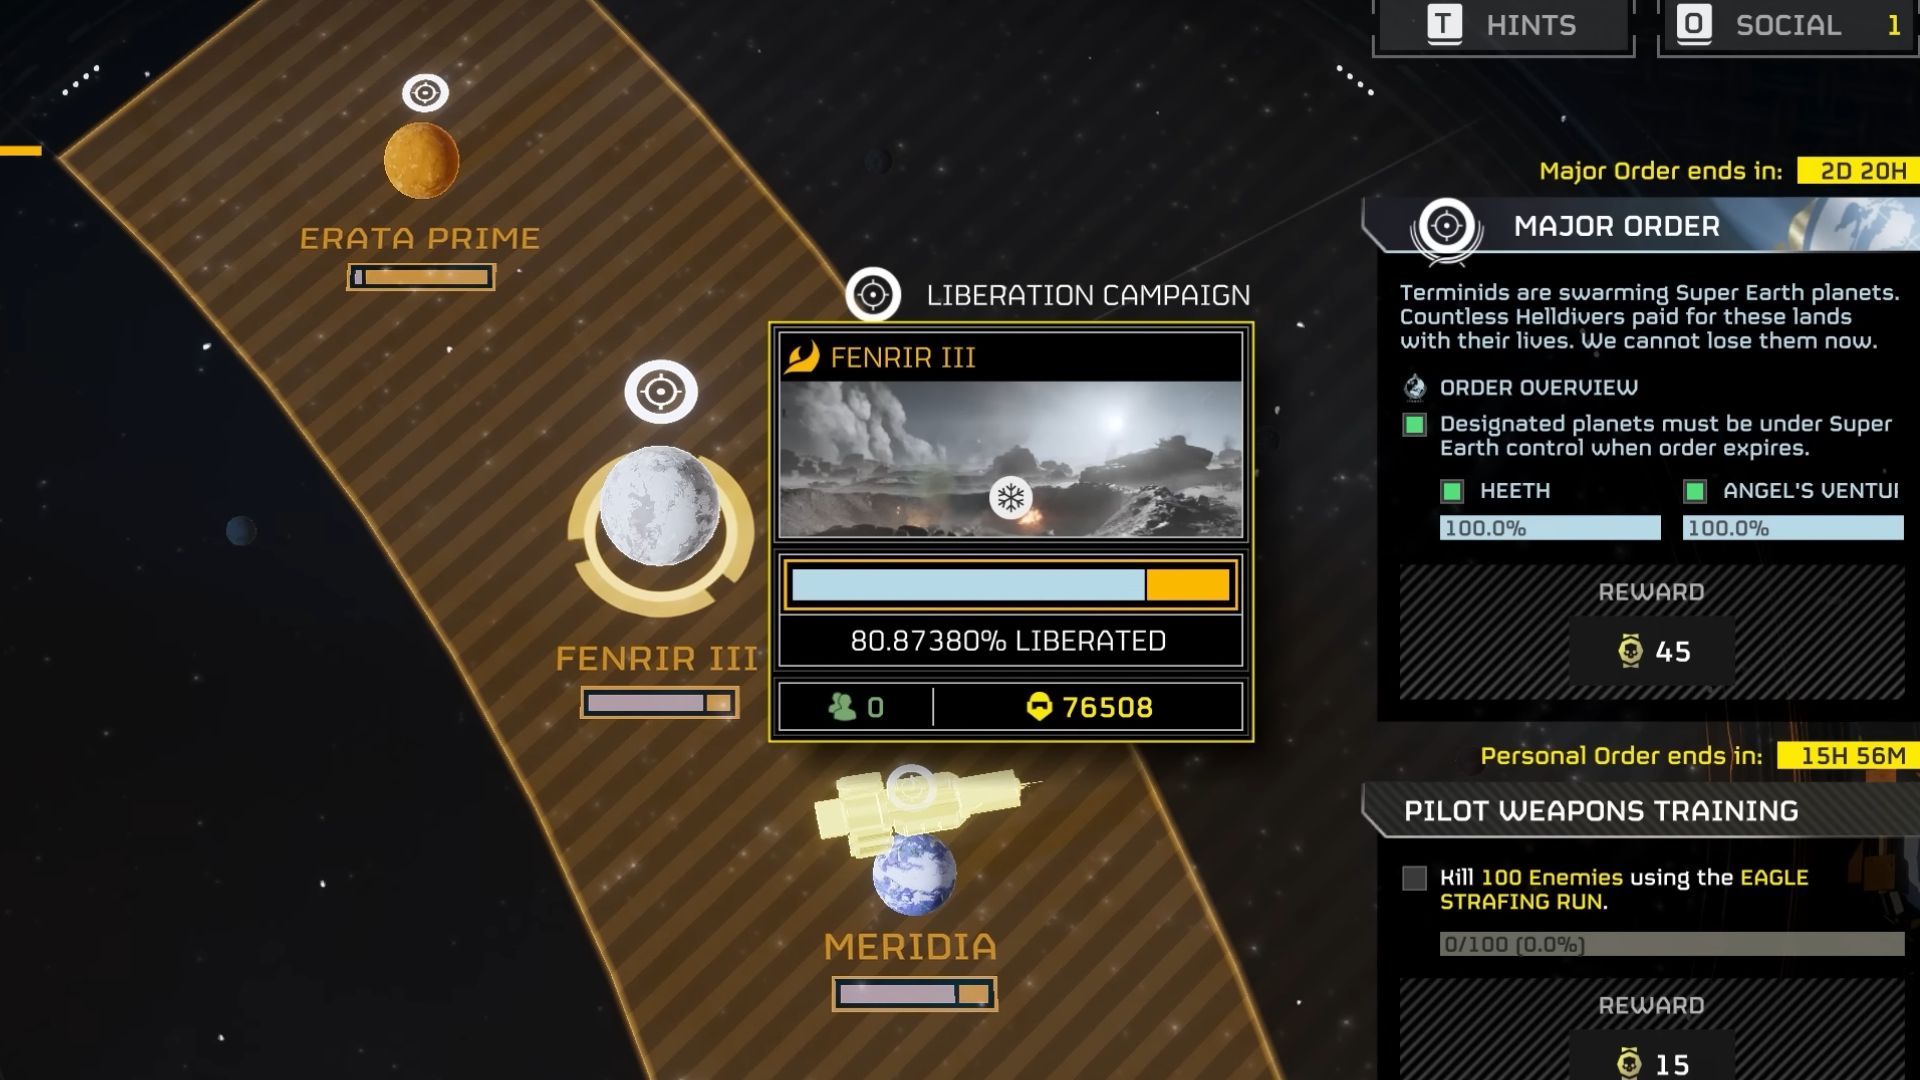 Highlighting planet liberated status for Fenrir III in the Galactic War map in Helldivers 2